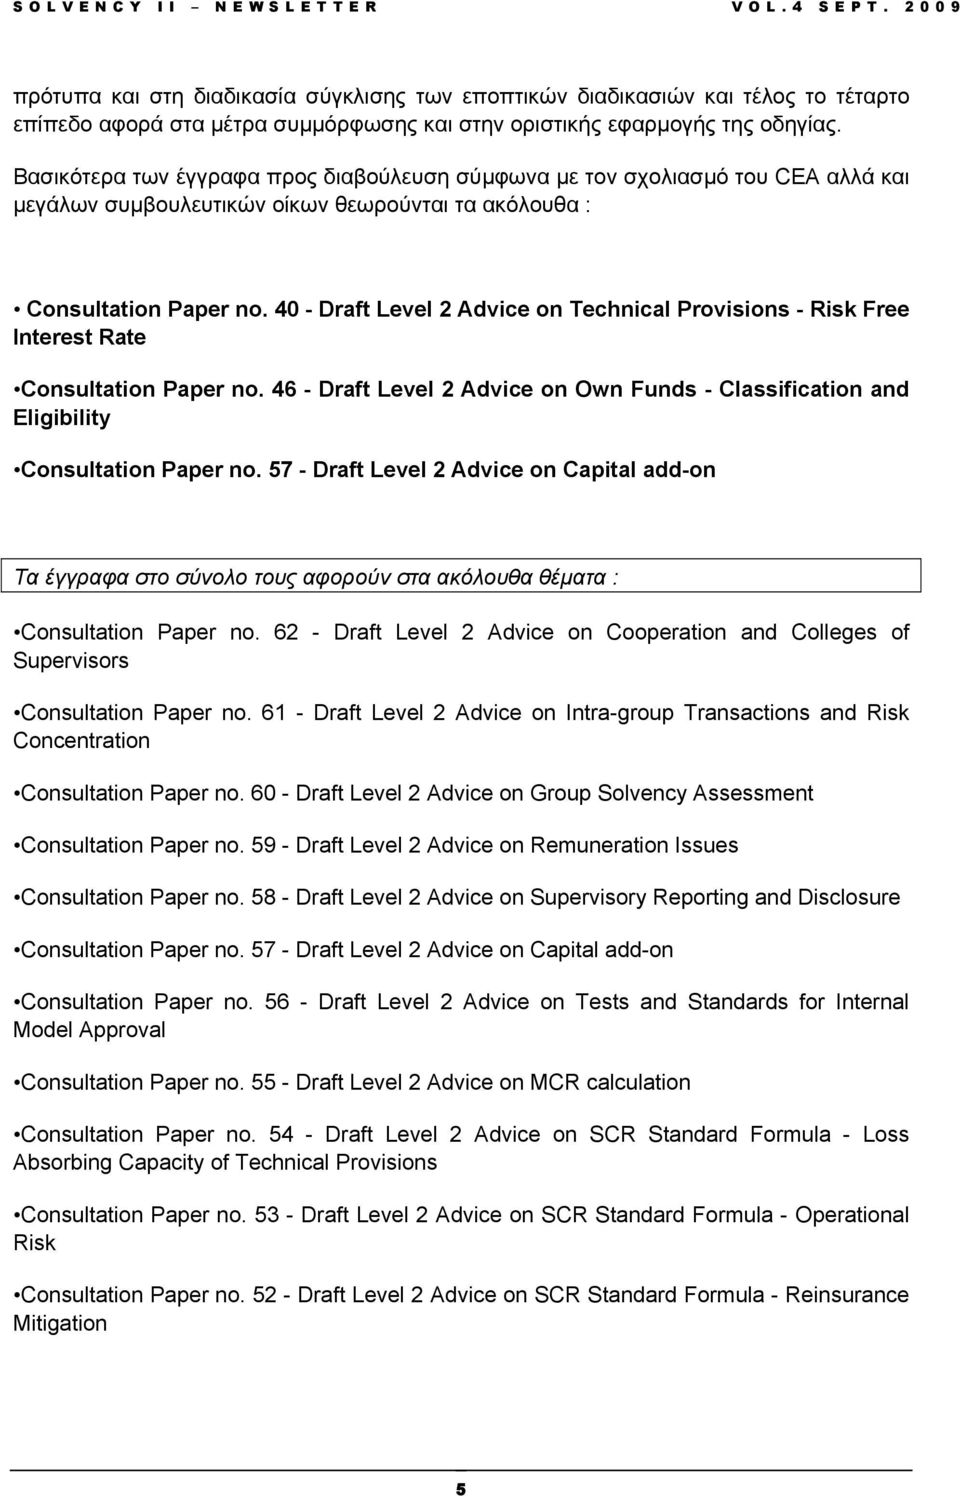 40 - Draft Level 2 Advice on Technical Provisions - Risk Free Interest Rate Consultation Paper no. 46 - Draft Level 2 Advice on Own Funds - Classification and Eligibility Consultation Paper no.